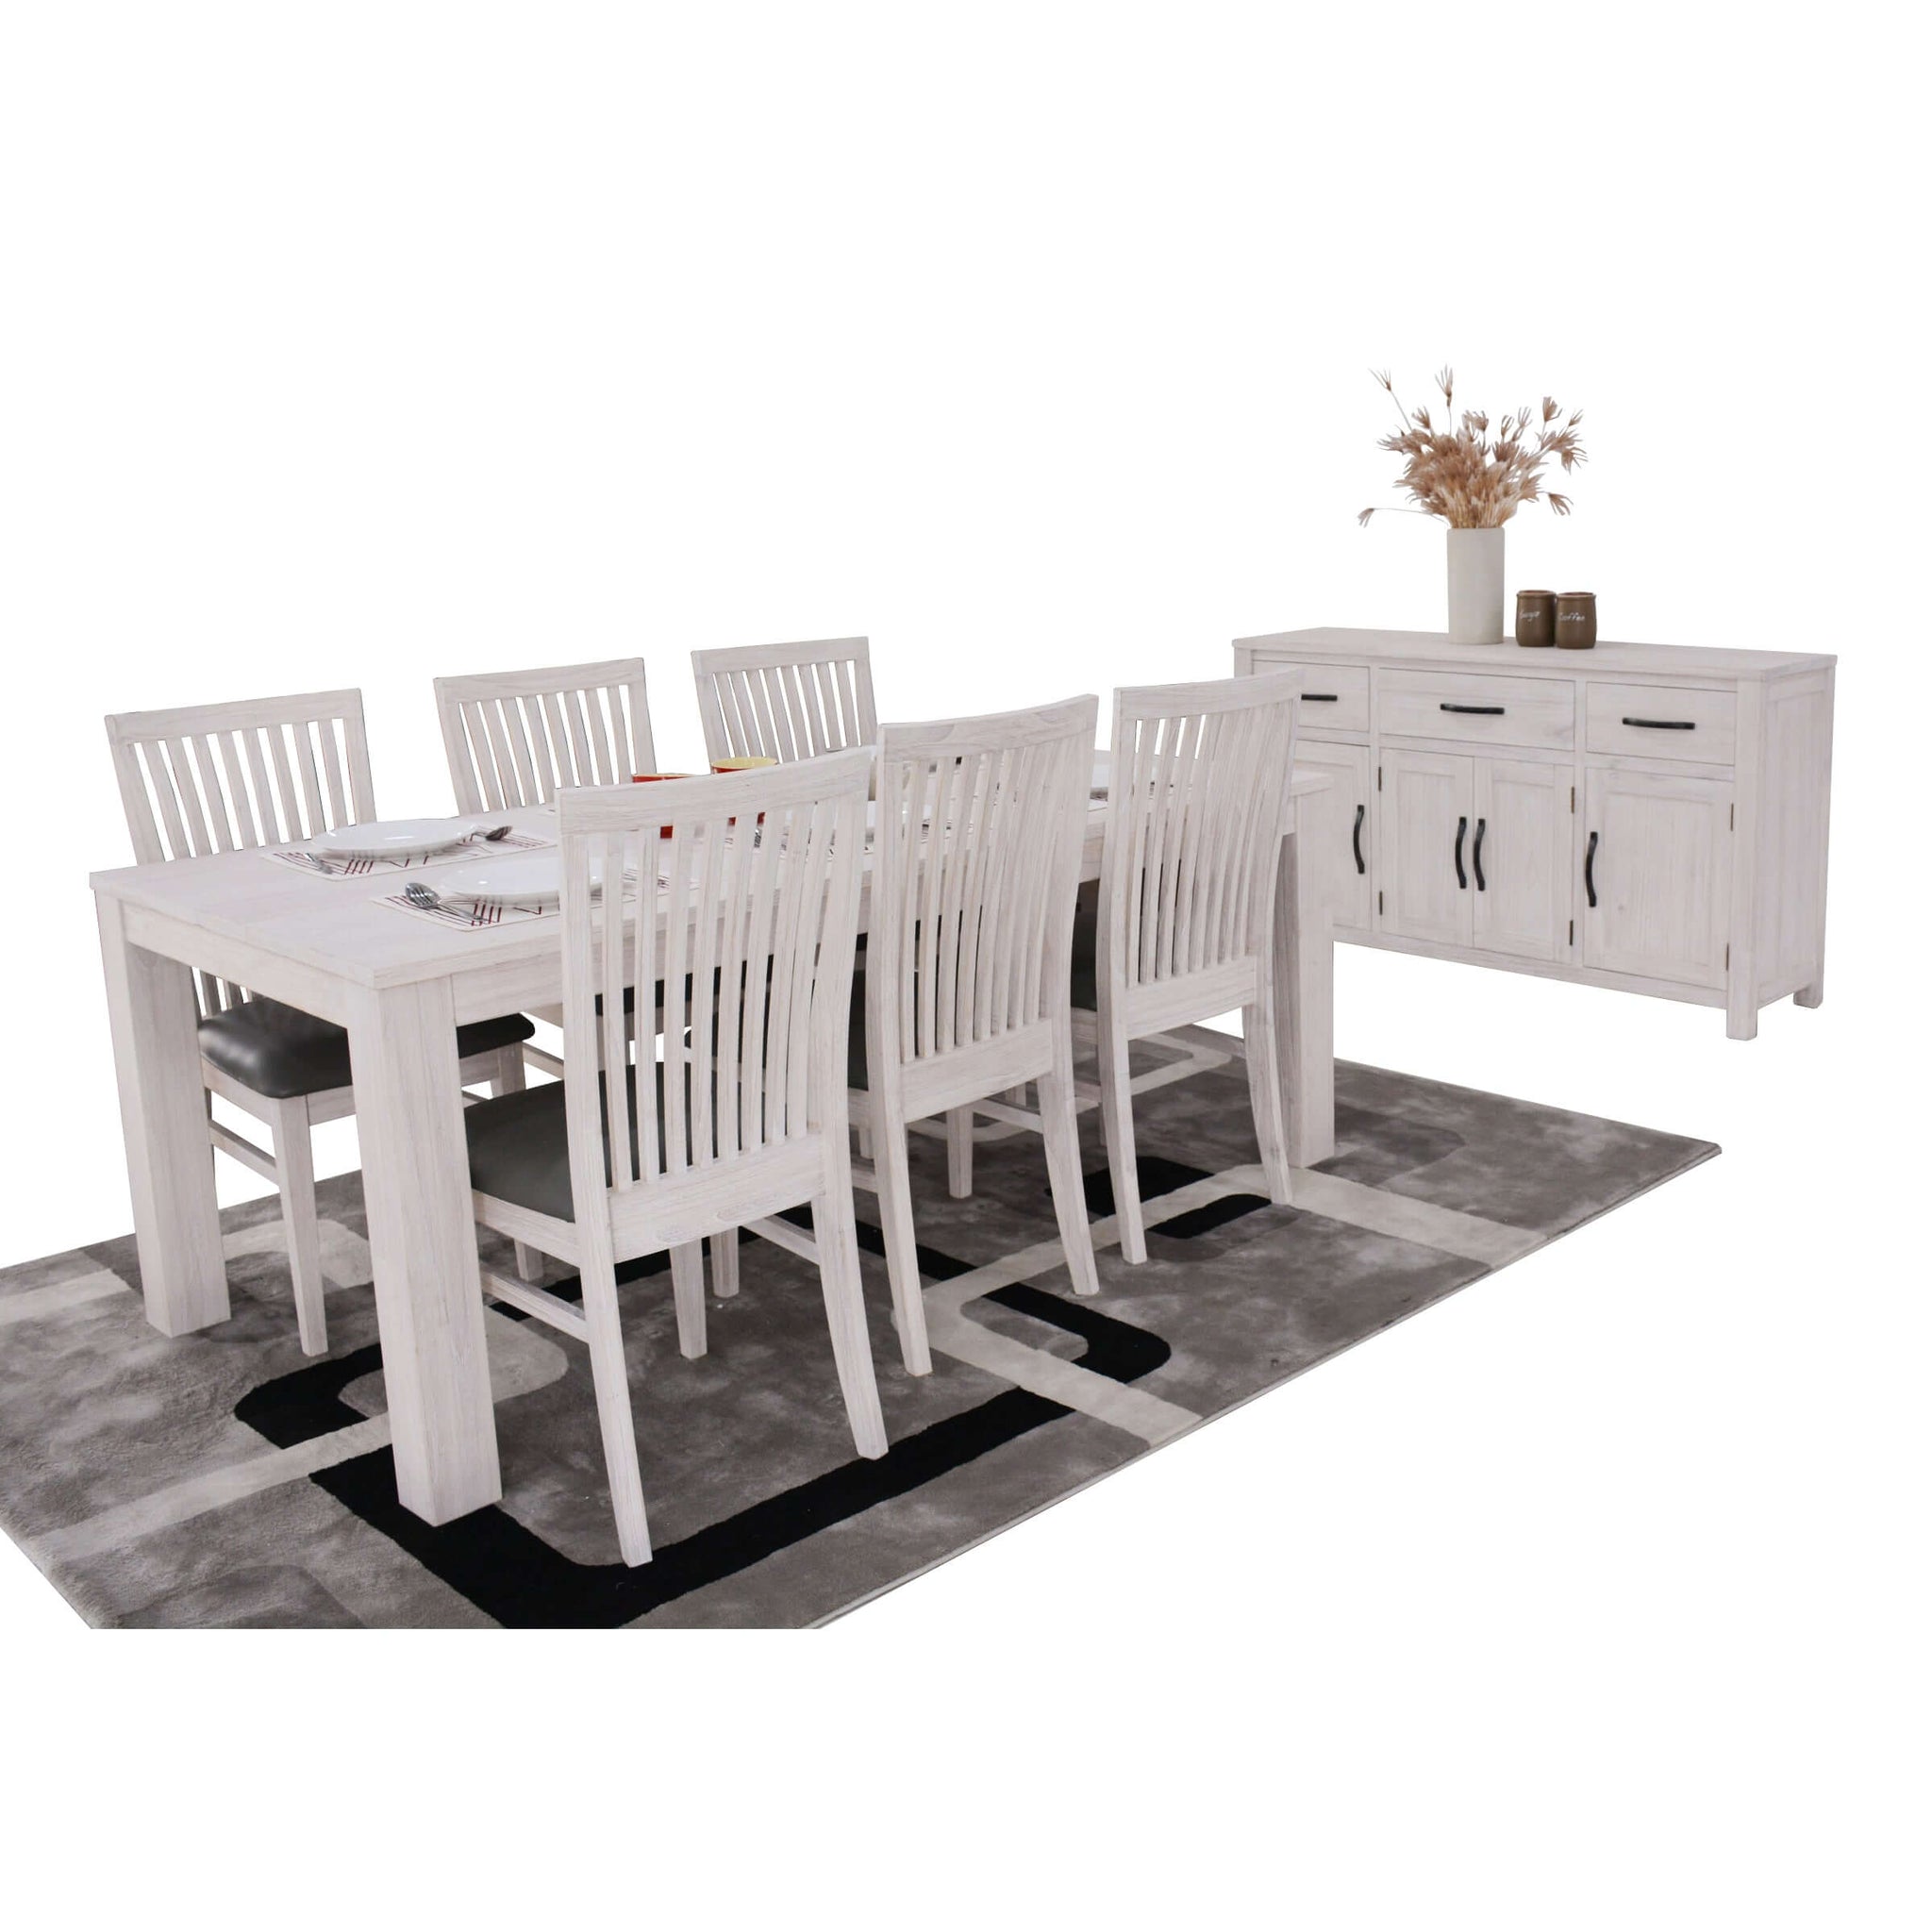 Foxglove Dining Table 150cm Solid Mt Ash Wood Home Dinner Furniture - White-Upinteriors